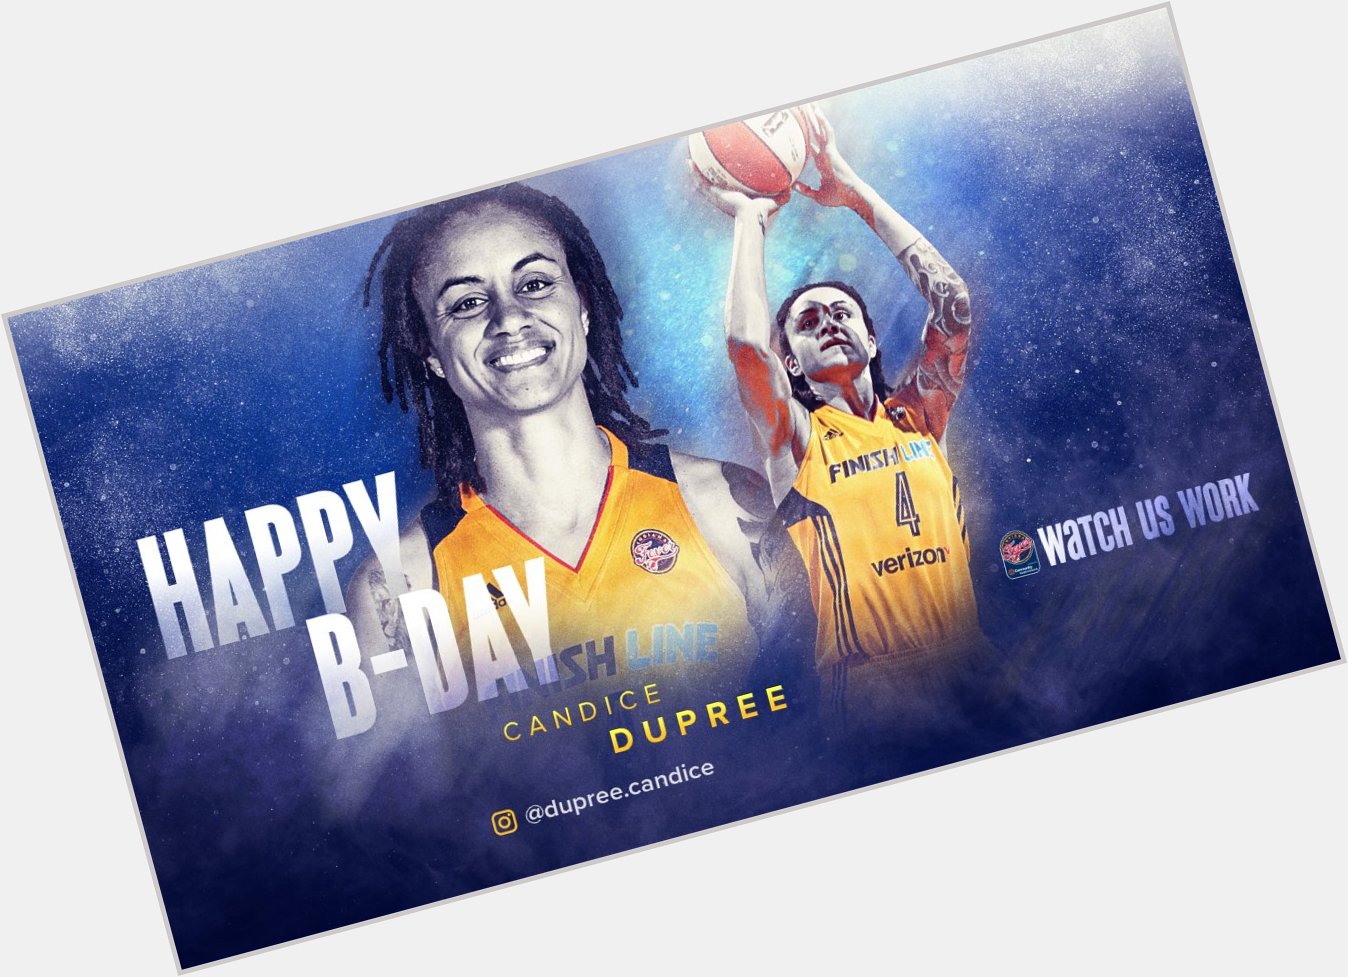 Please join us in wishing Candice Dupree a very happy birthday!!! 